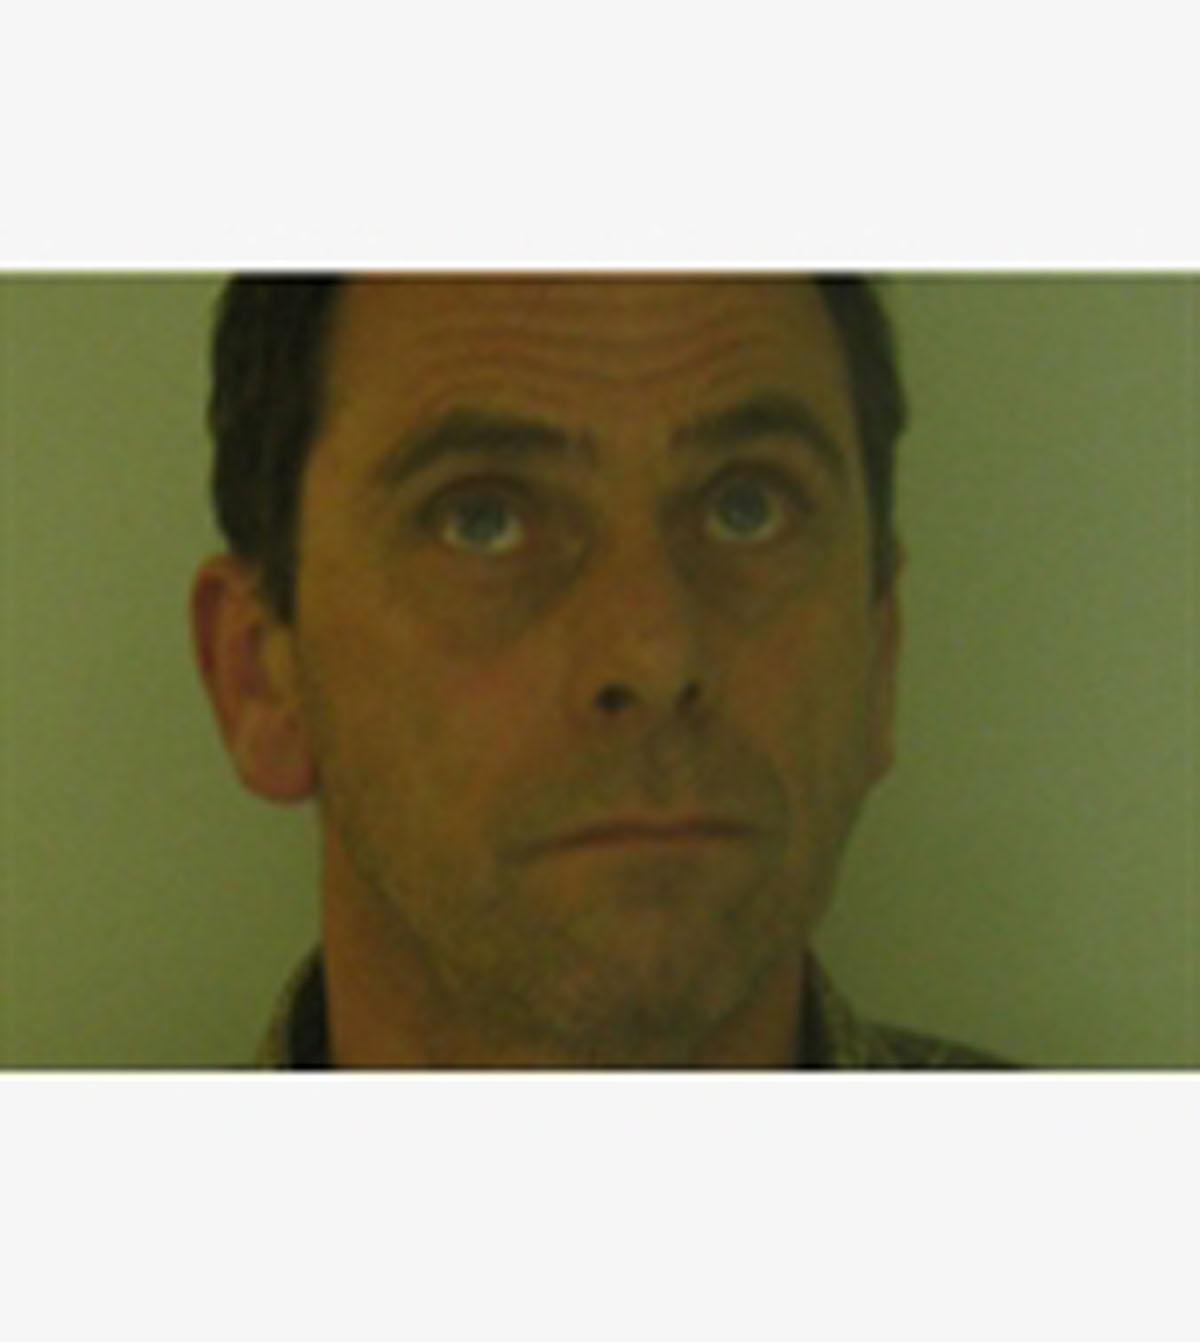 James Davies is wanted for recall to prison after leaving on licence in April 2013. 